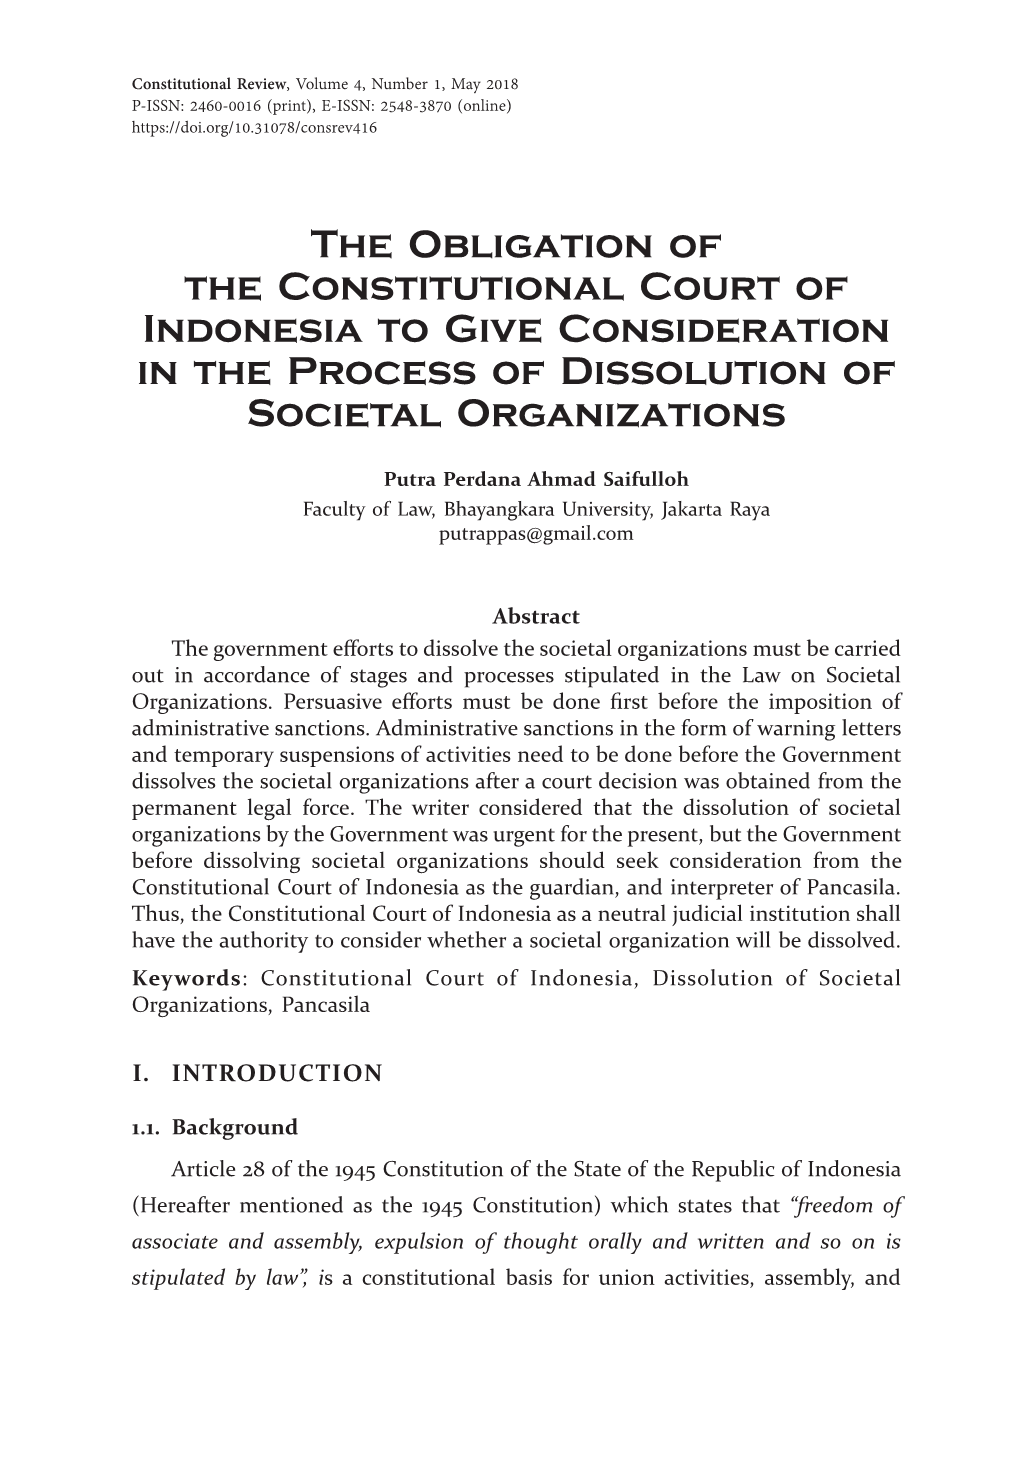 The Obligation of the Constitutional Court of Indonesia to Give Consideration in the Process of Dissolution of Societal Organizations